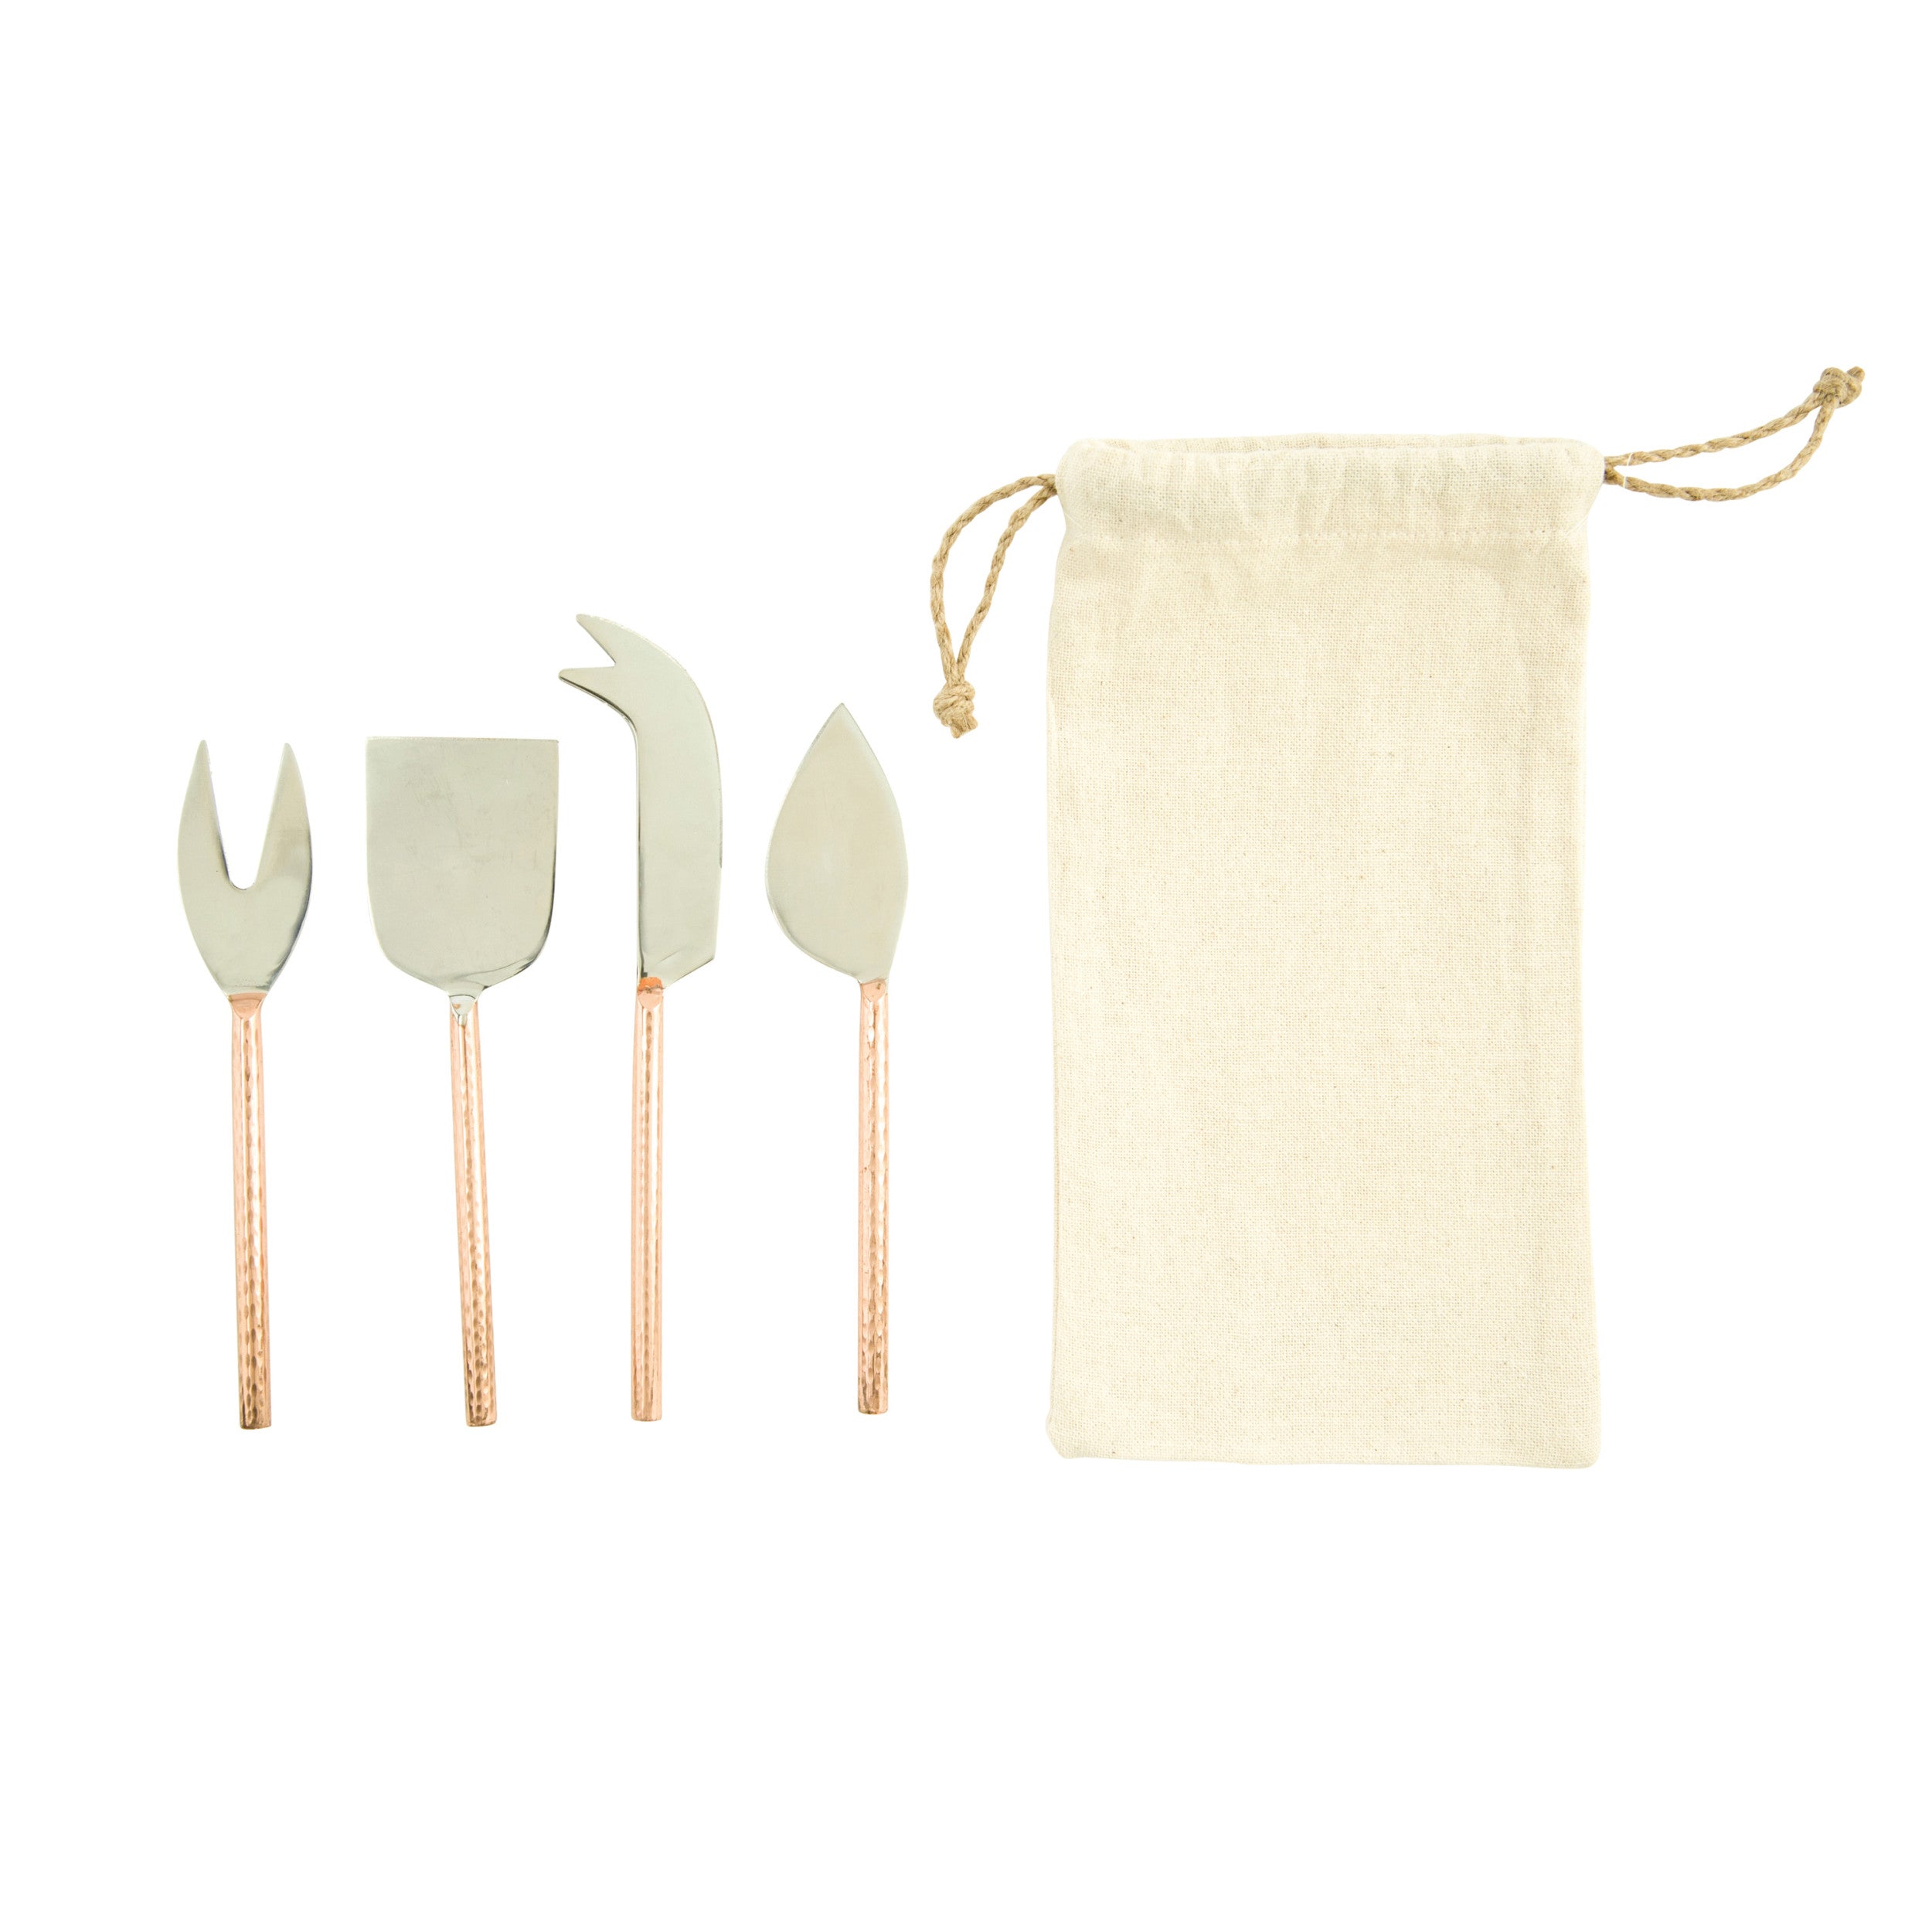 Copper Detail Cheese Service Set